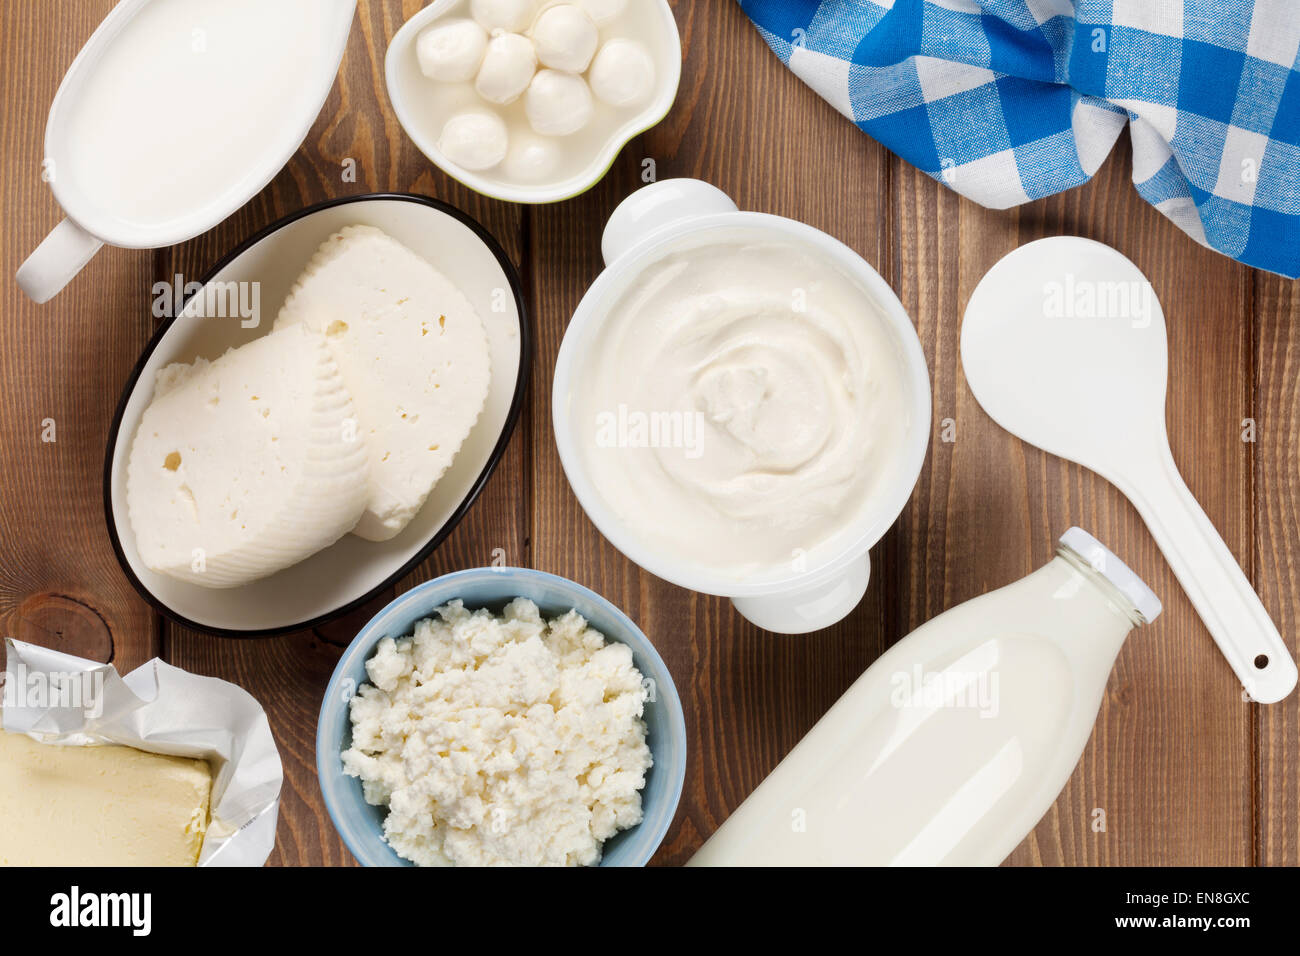 Dairy products on wooden table. Sour cream, milk, cheese, yogurt and butter. Top view Stock Photo